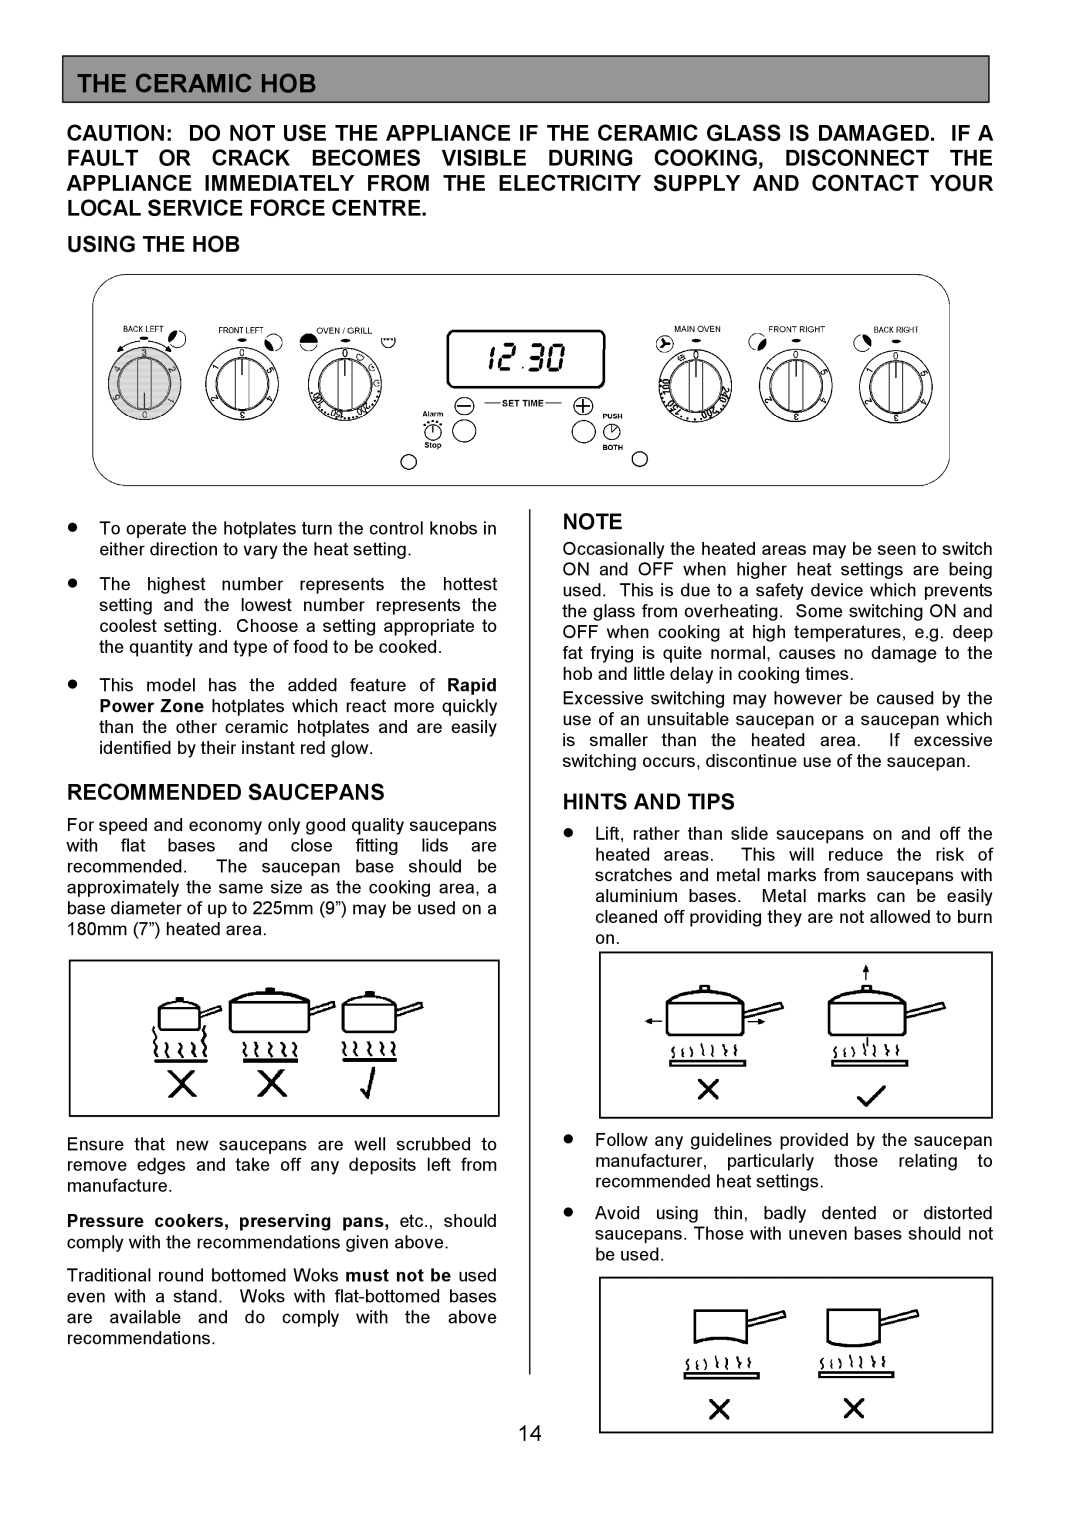 Tricity Bendix SE554 installation instructions Ceramic HOB, Using the HOB, Recommended Saucepans, Hints and Tips 